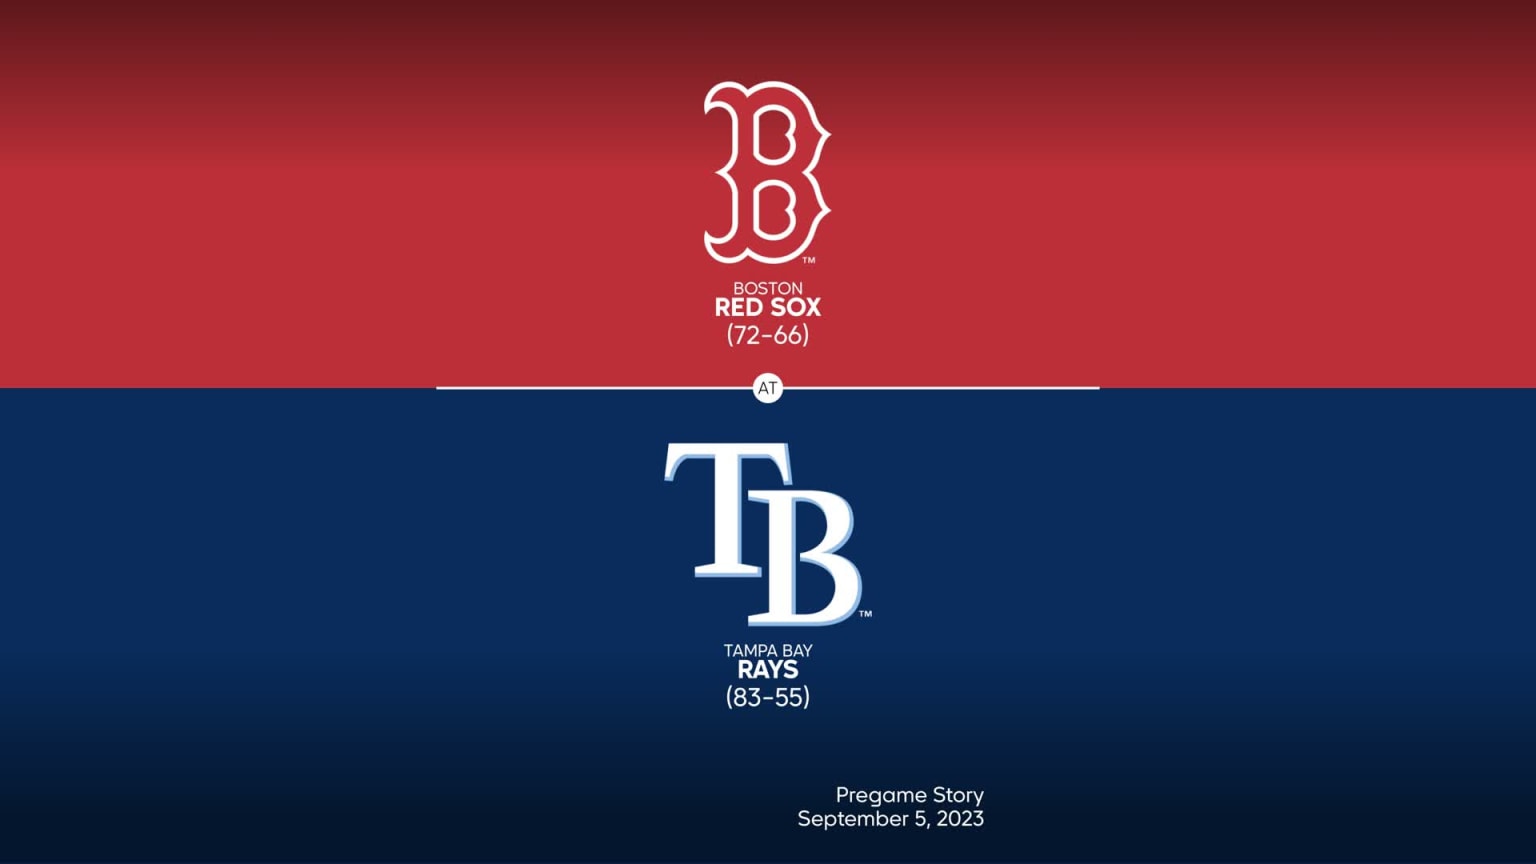 Red Sox at Rays - September 5, 2023: Title Slate